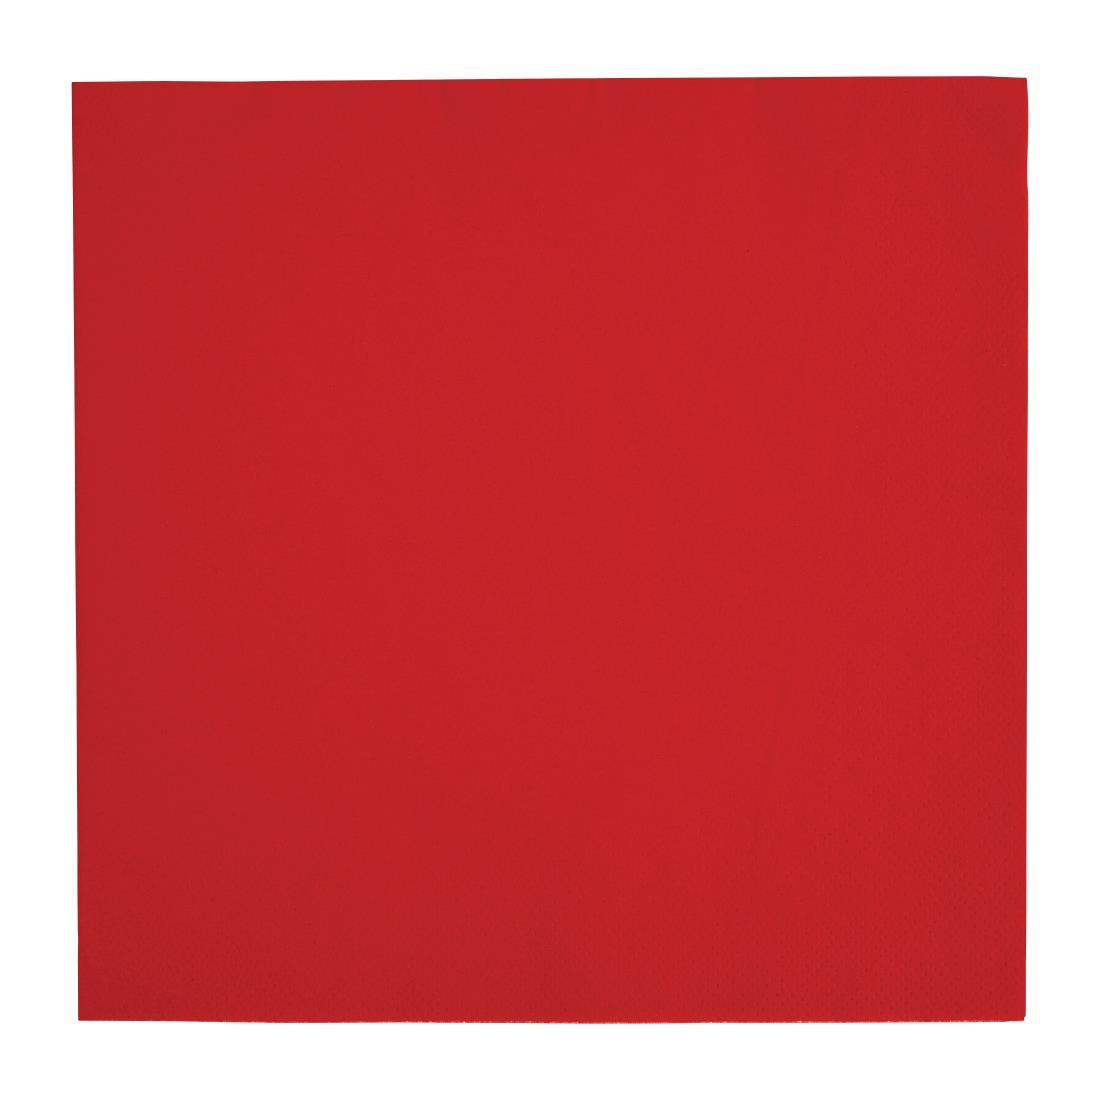 FE254 Fiesta Recyclable Dinner Napkin Red 40x40cm 3ply 1/4 Fold (Pack of 1000) JD Catering Equipment Solutions Ltd